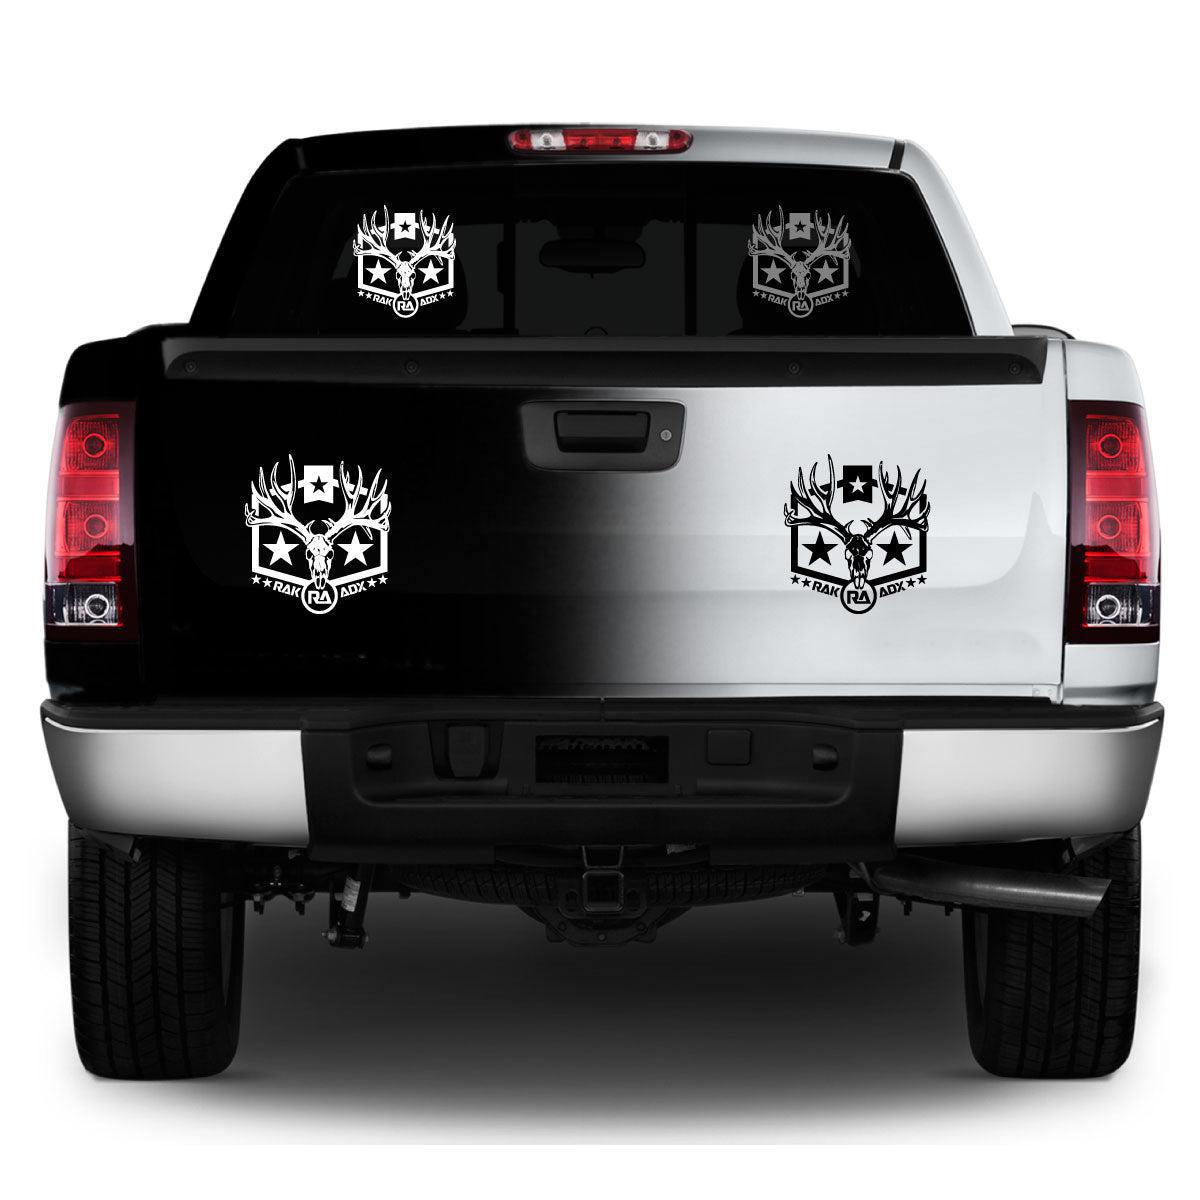 Muley Skull Decal - Discontinue